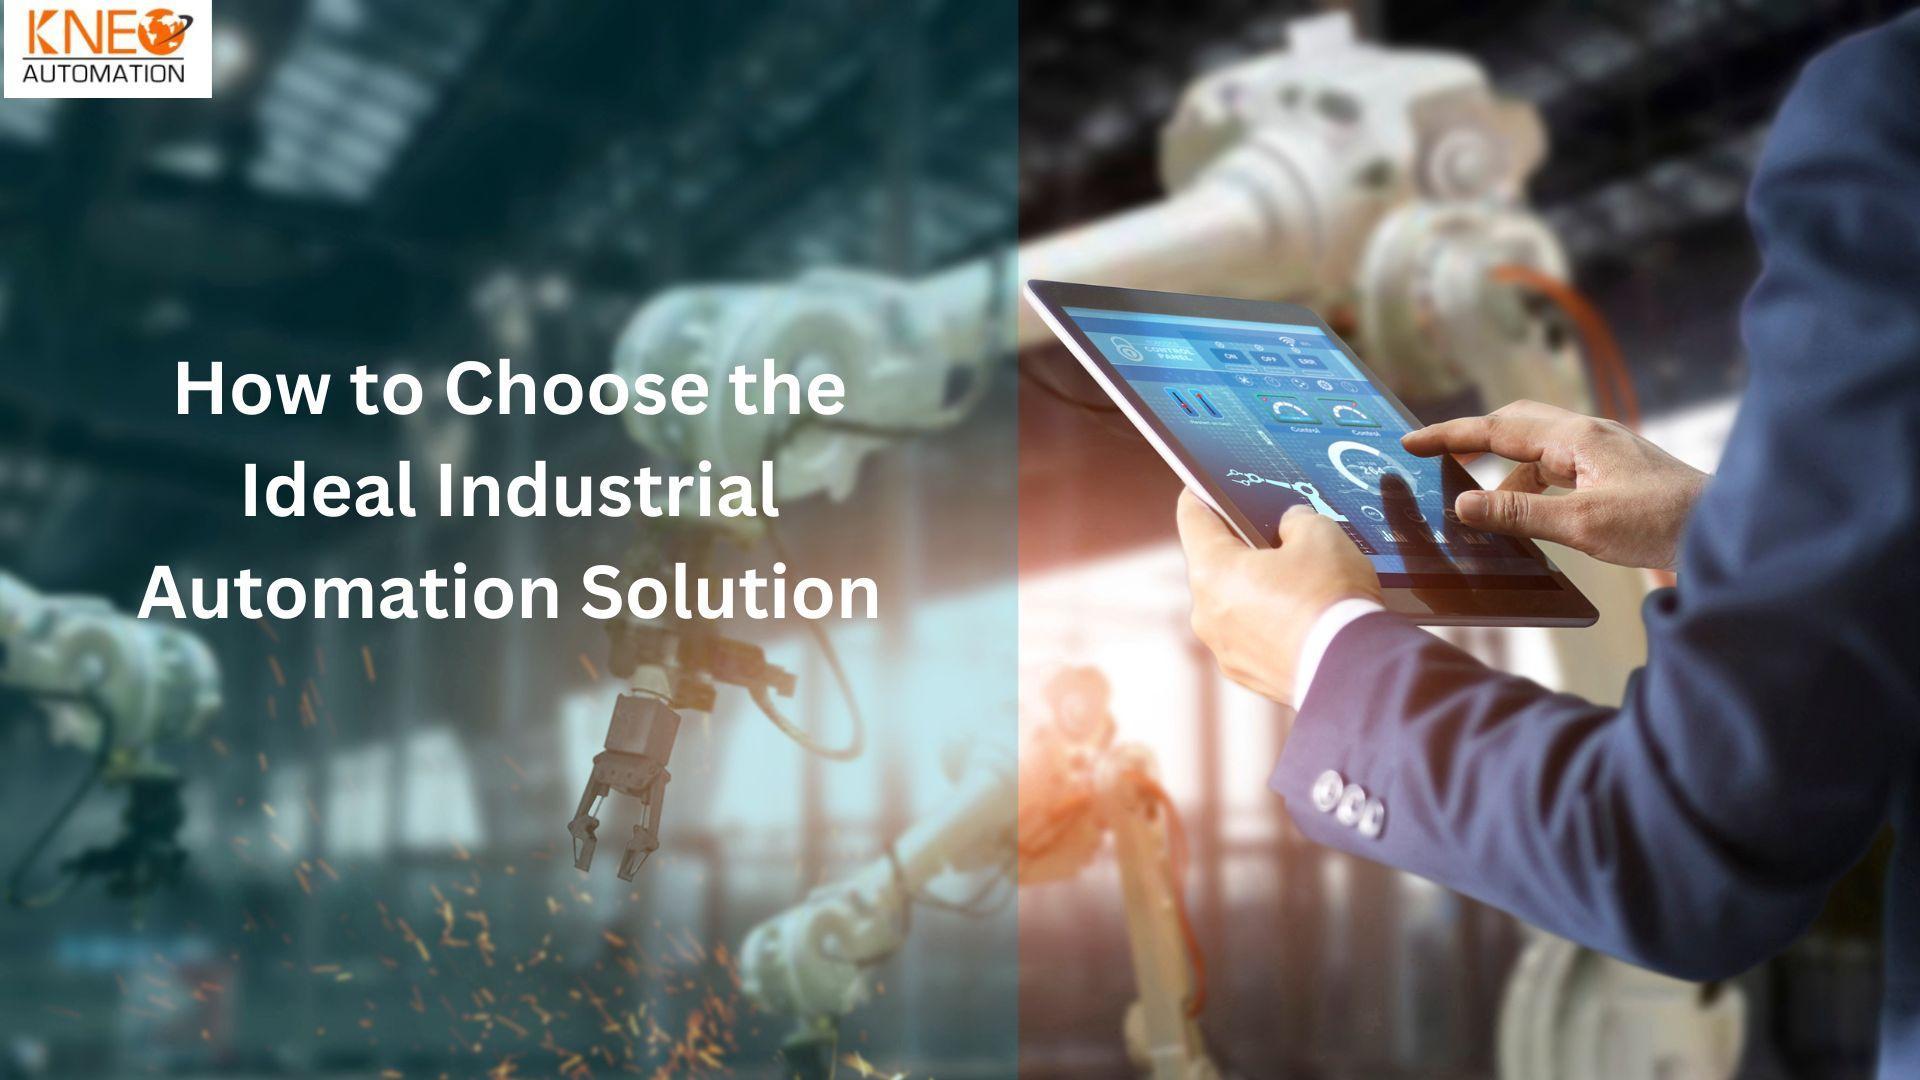 Product How to Choose the Ideal Industrial Automation Solution - KNEO Automation image